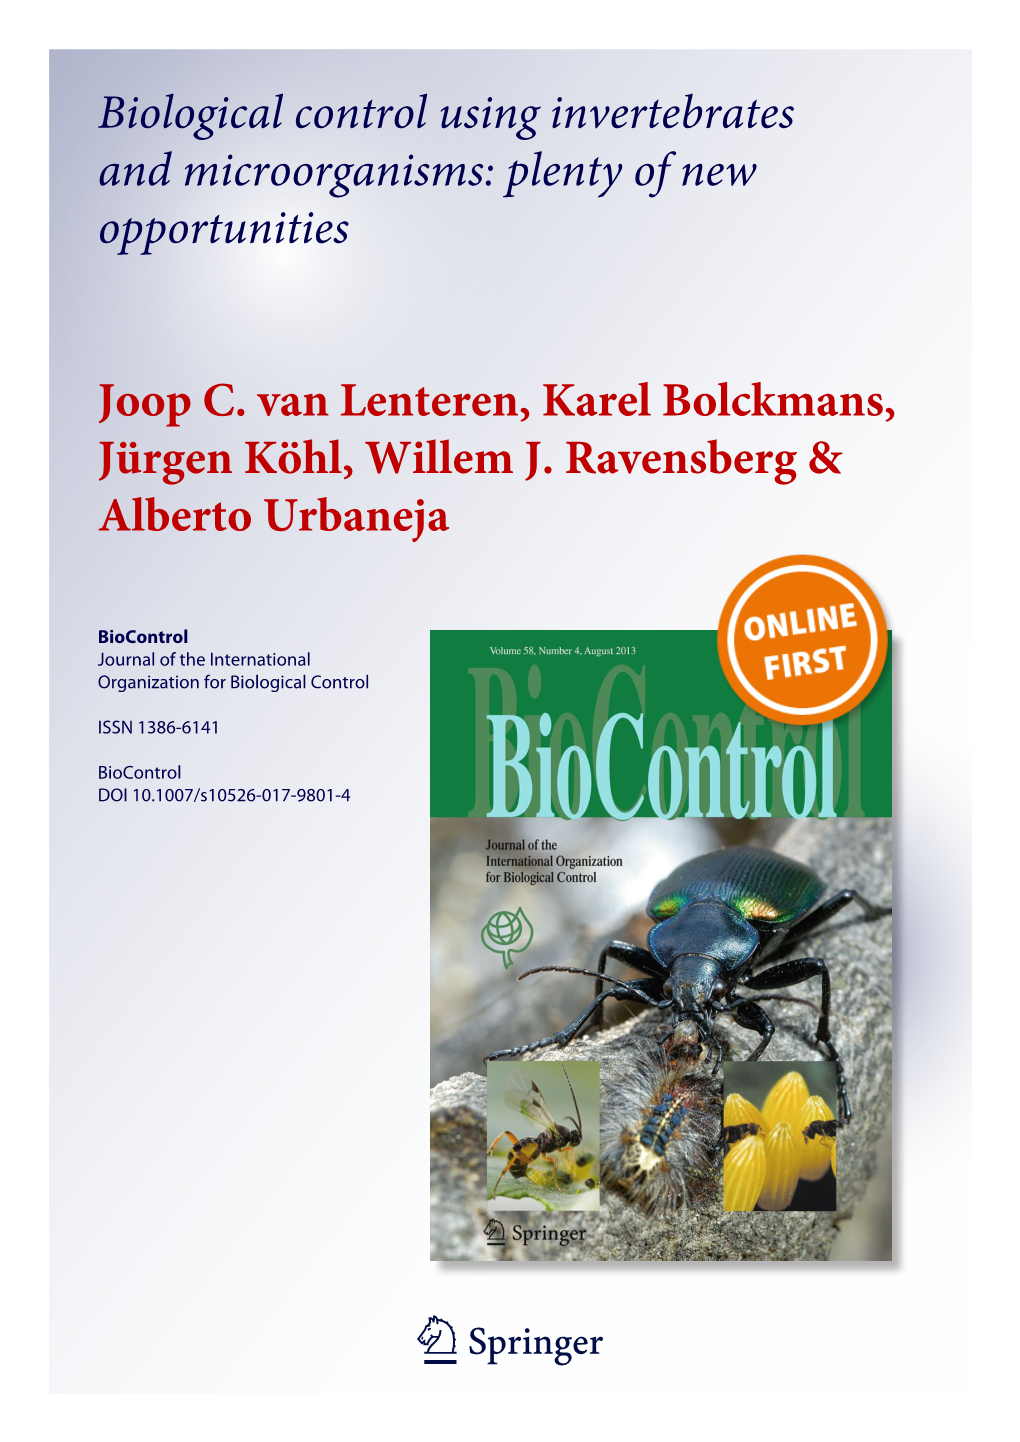 Biological Control Using Invertebrates and Microorganisms: Plenty of New Opportunities